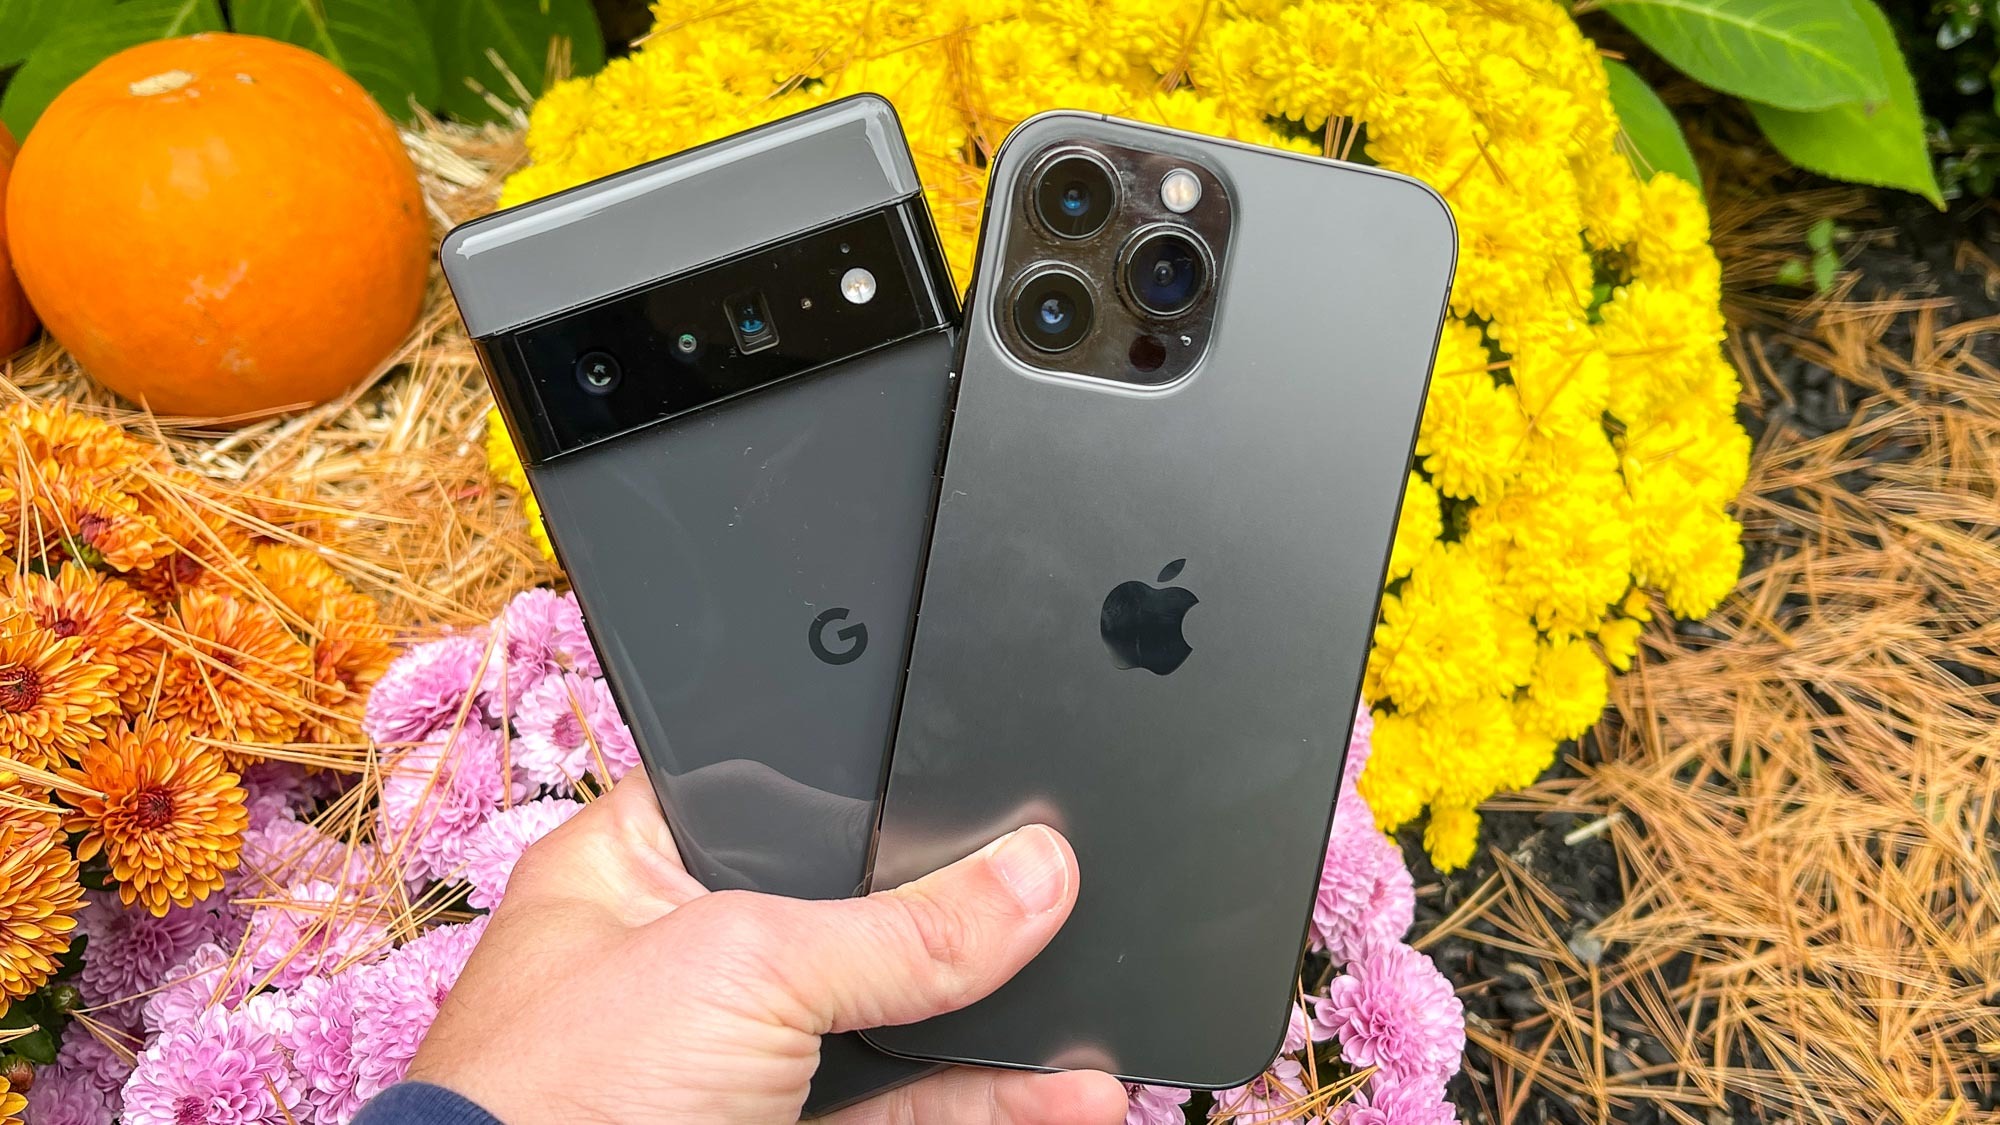 OnePlus 10 Pro vs. iPhone 13 Pro Max: Which phone wins?